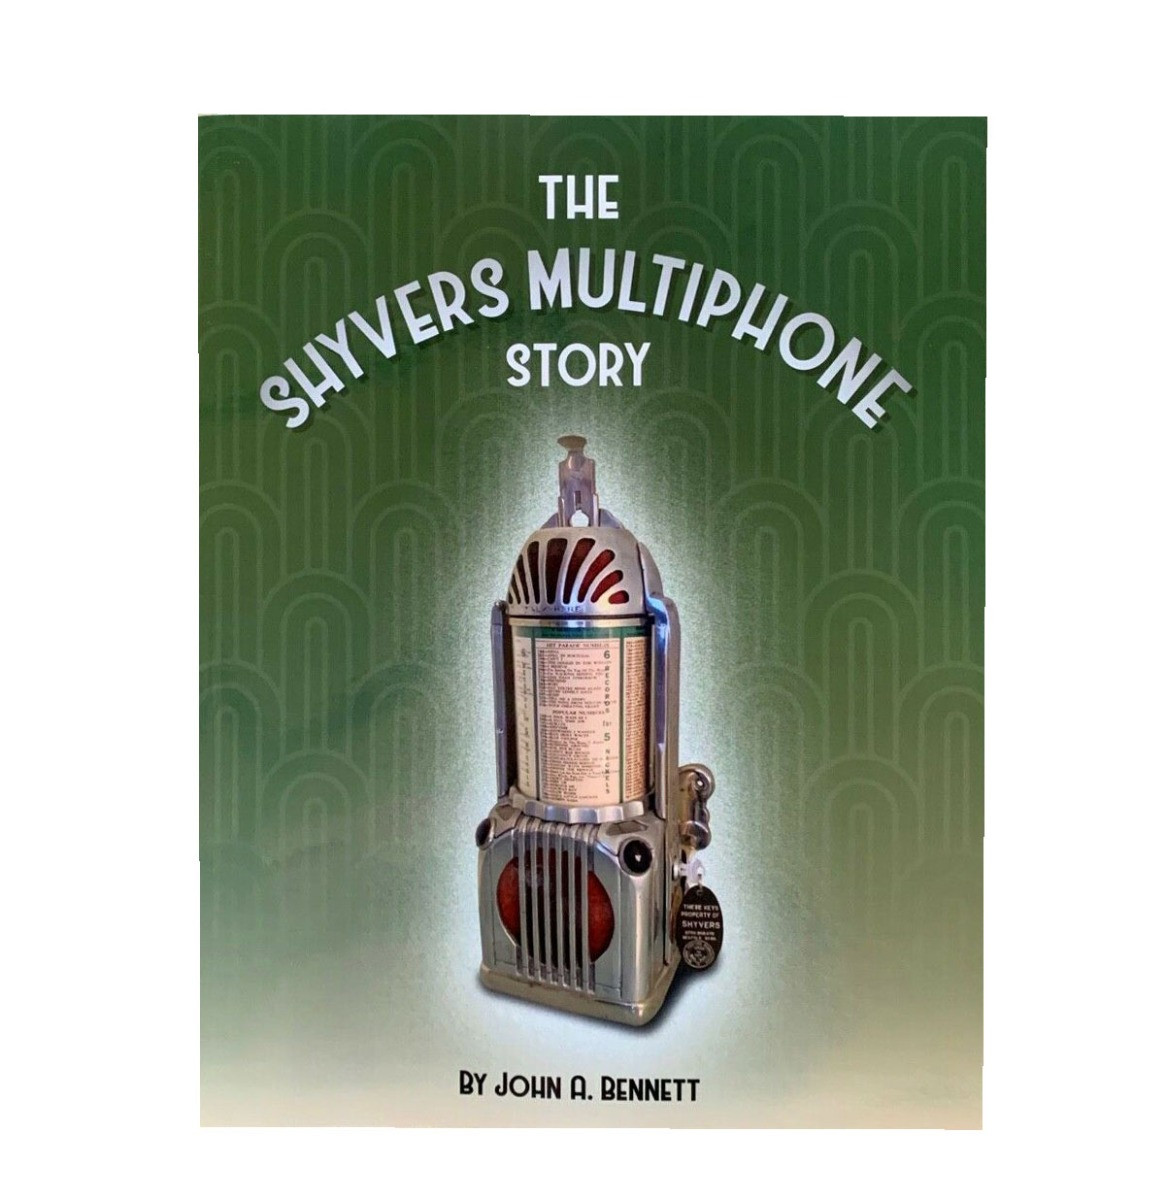 The Shyvers Multiphone Story Book by John Bennett